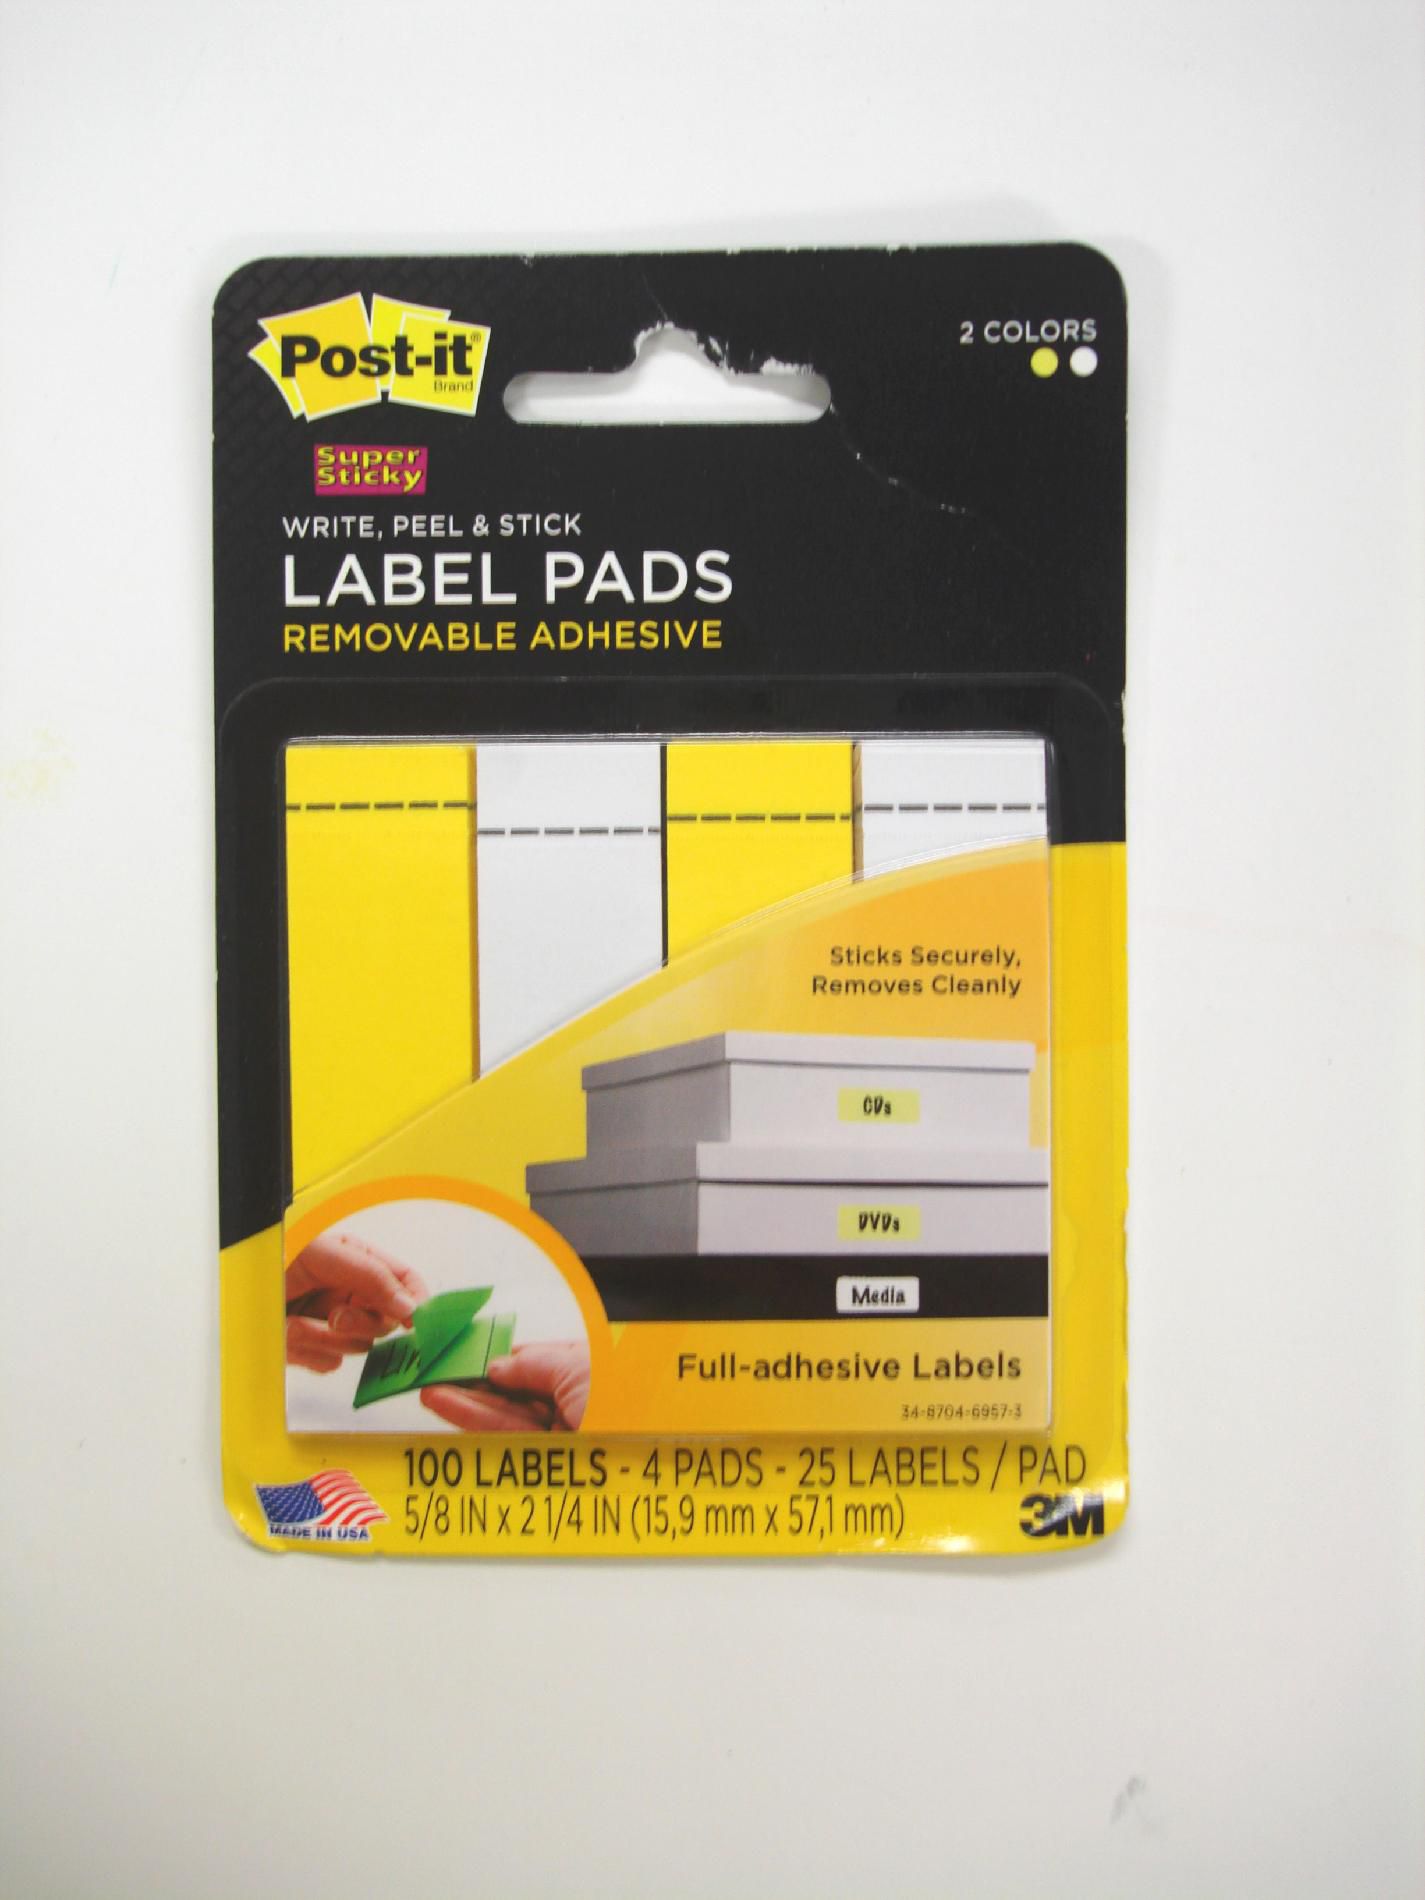 Post-it Super Sticky Write, Peel, & Stick Label Pads Removable Adhesive  100 labels 4 Pads 5/8 in x 2 1/4 in